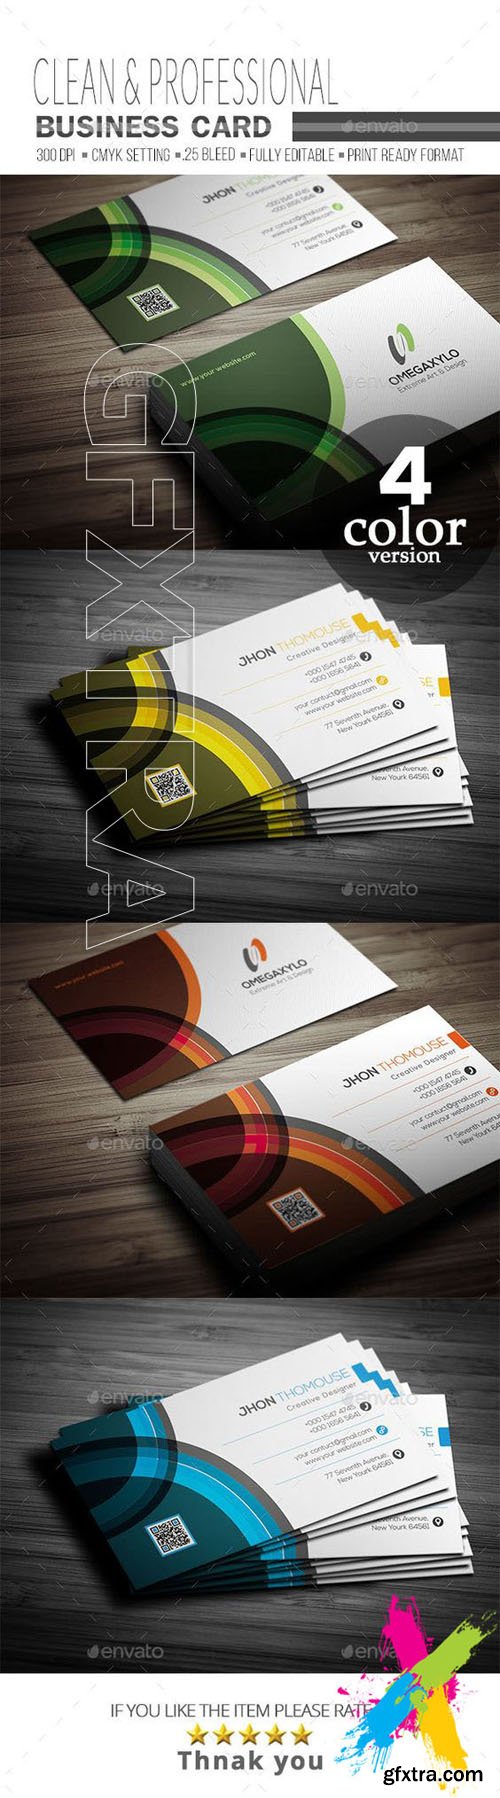 Graphicriver - Business Card 20294076